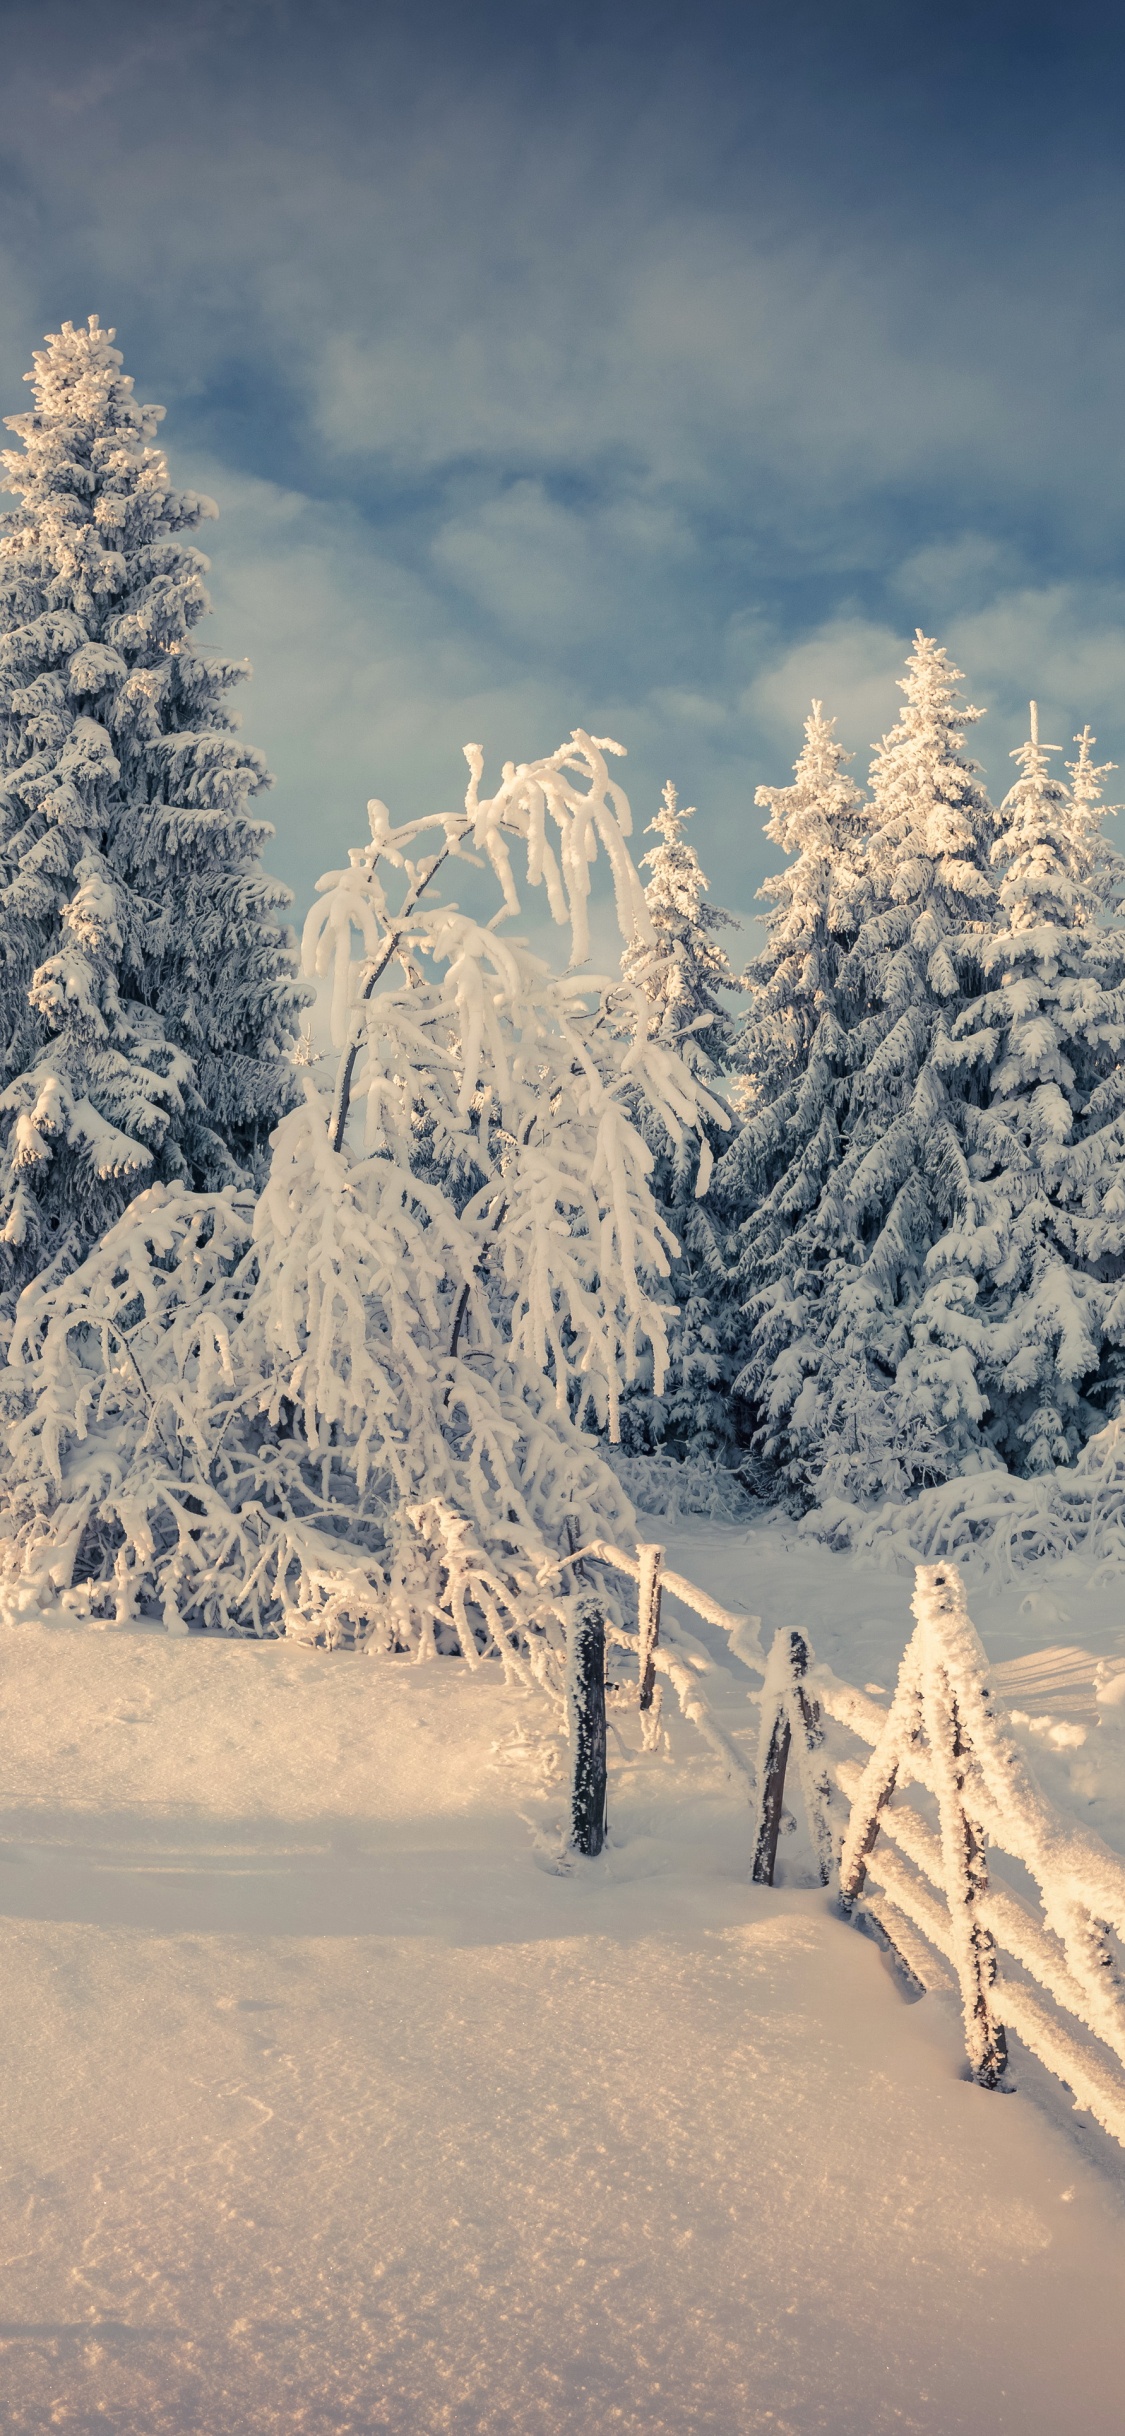 Snow Covered Trees and Mountains During Daytime. Wallpaper in 1125x2436 Resolution